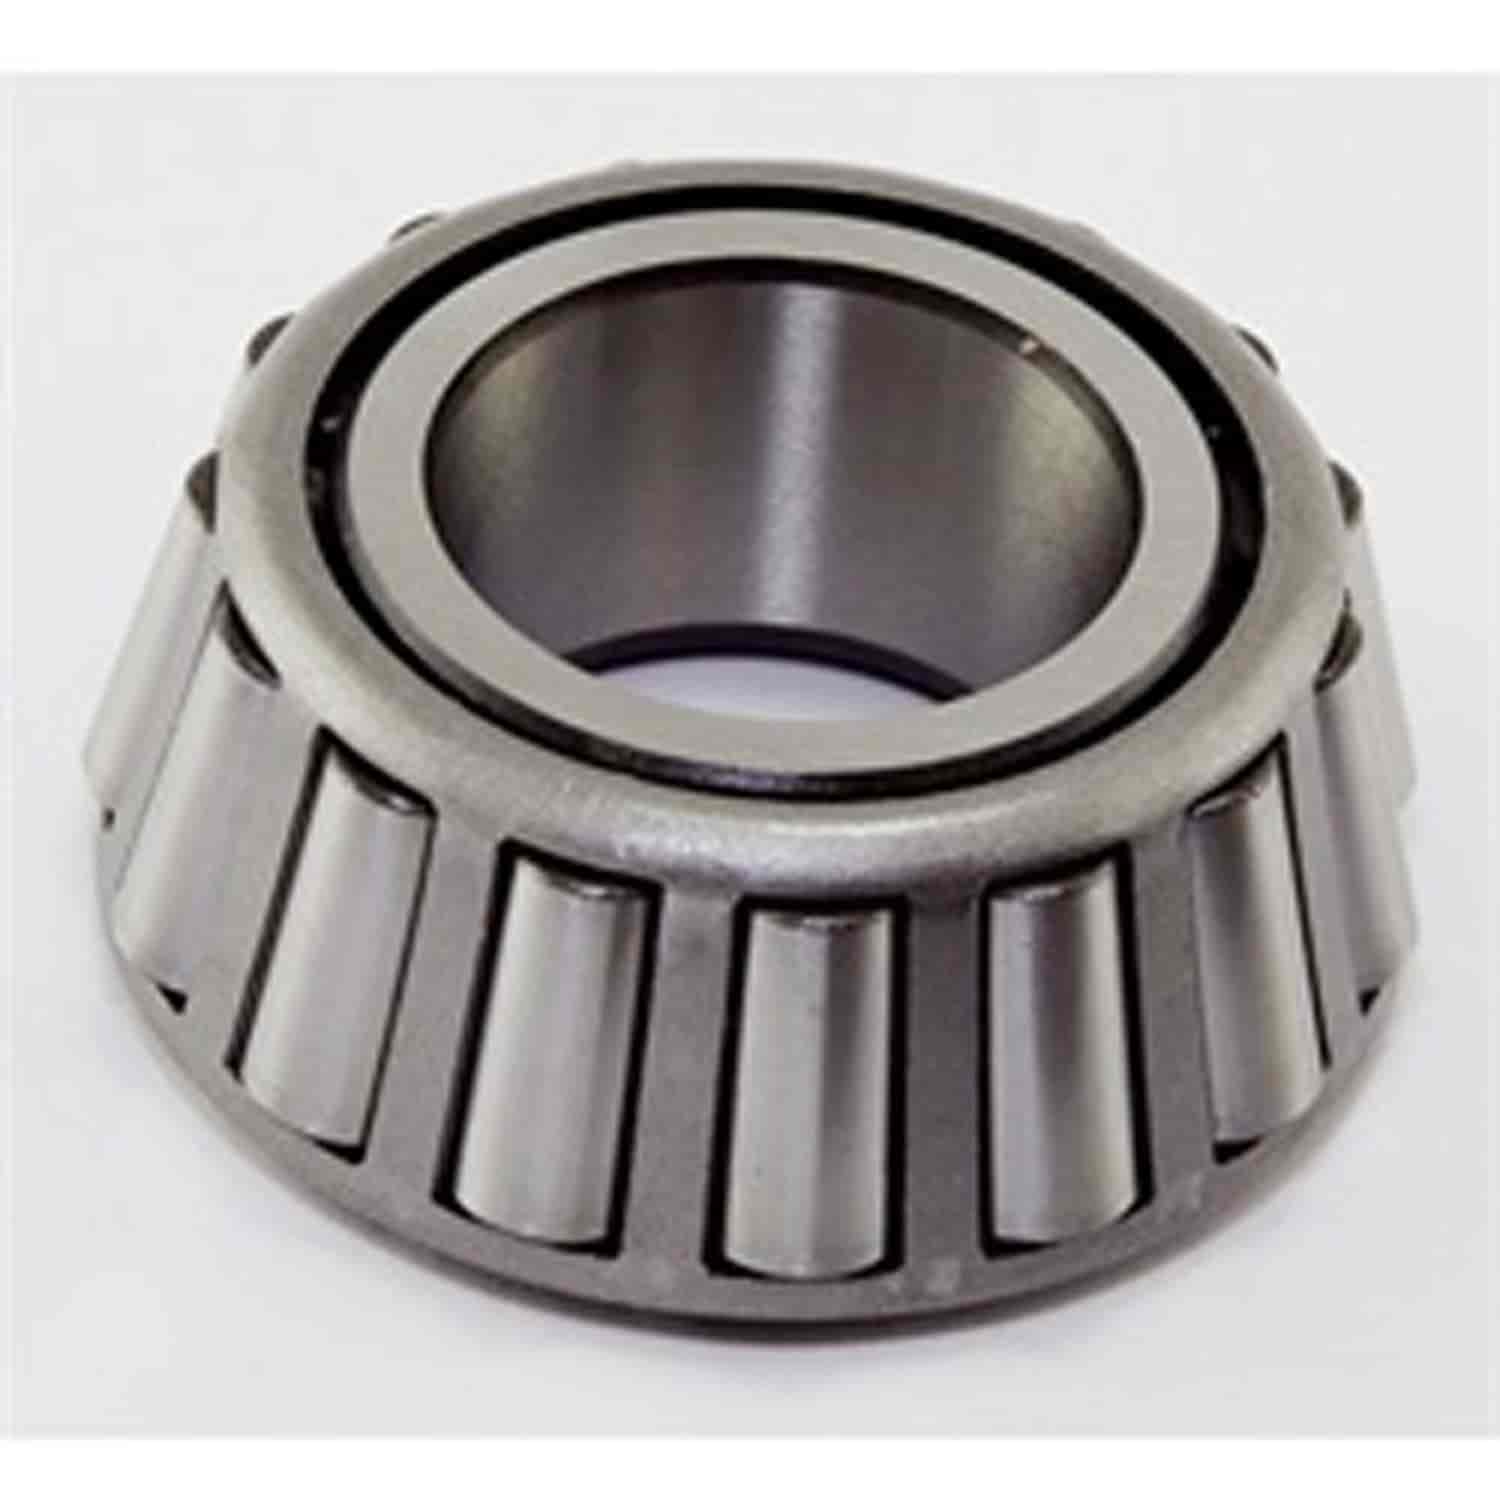 This inner pinion bearing cone from Omix-ADA fits the Spicer 23-2 rear axle used in 41-45 Ford GPWs